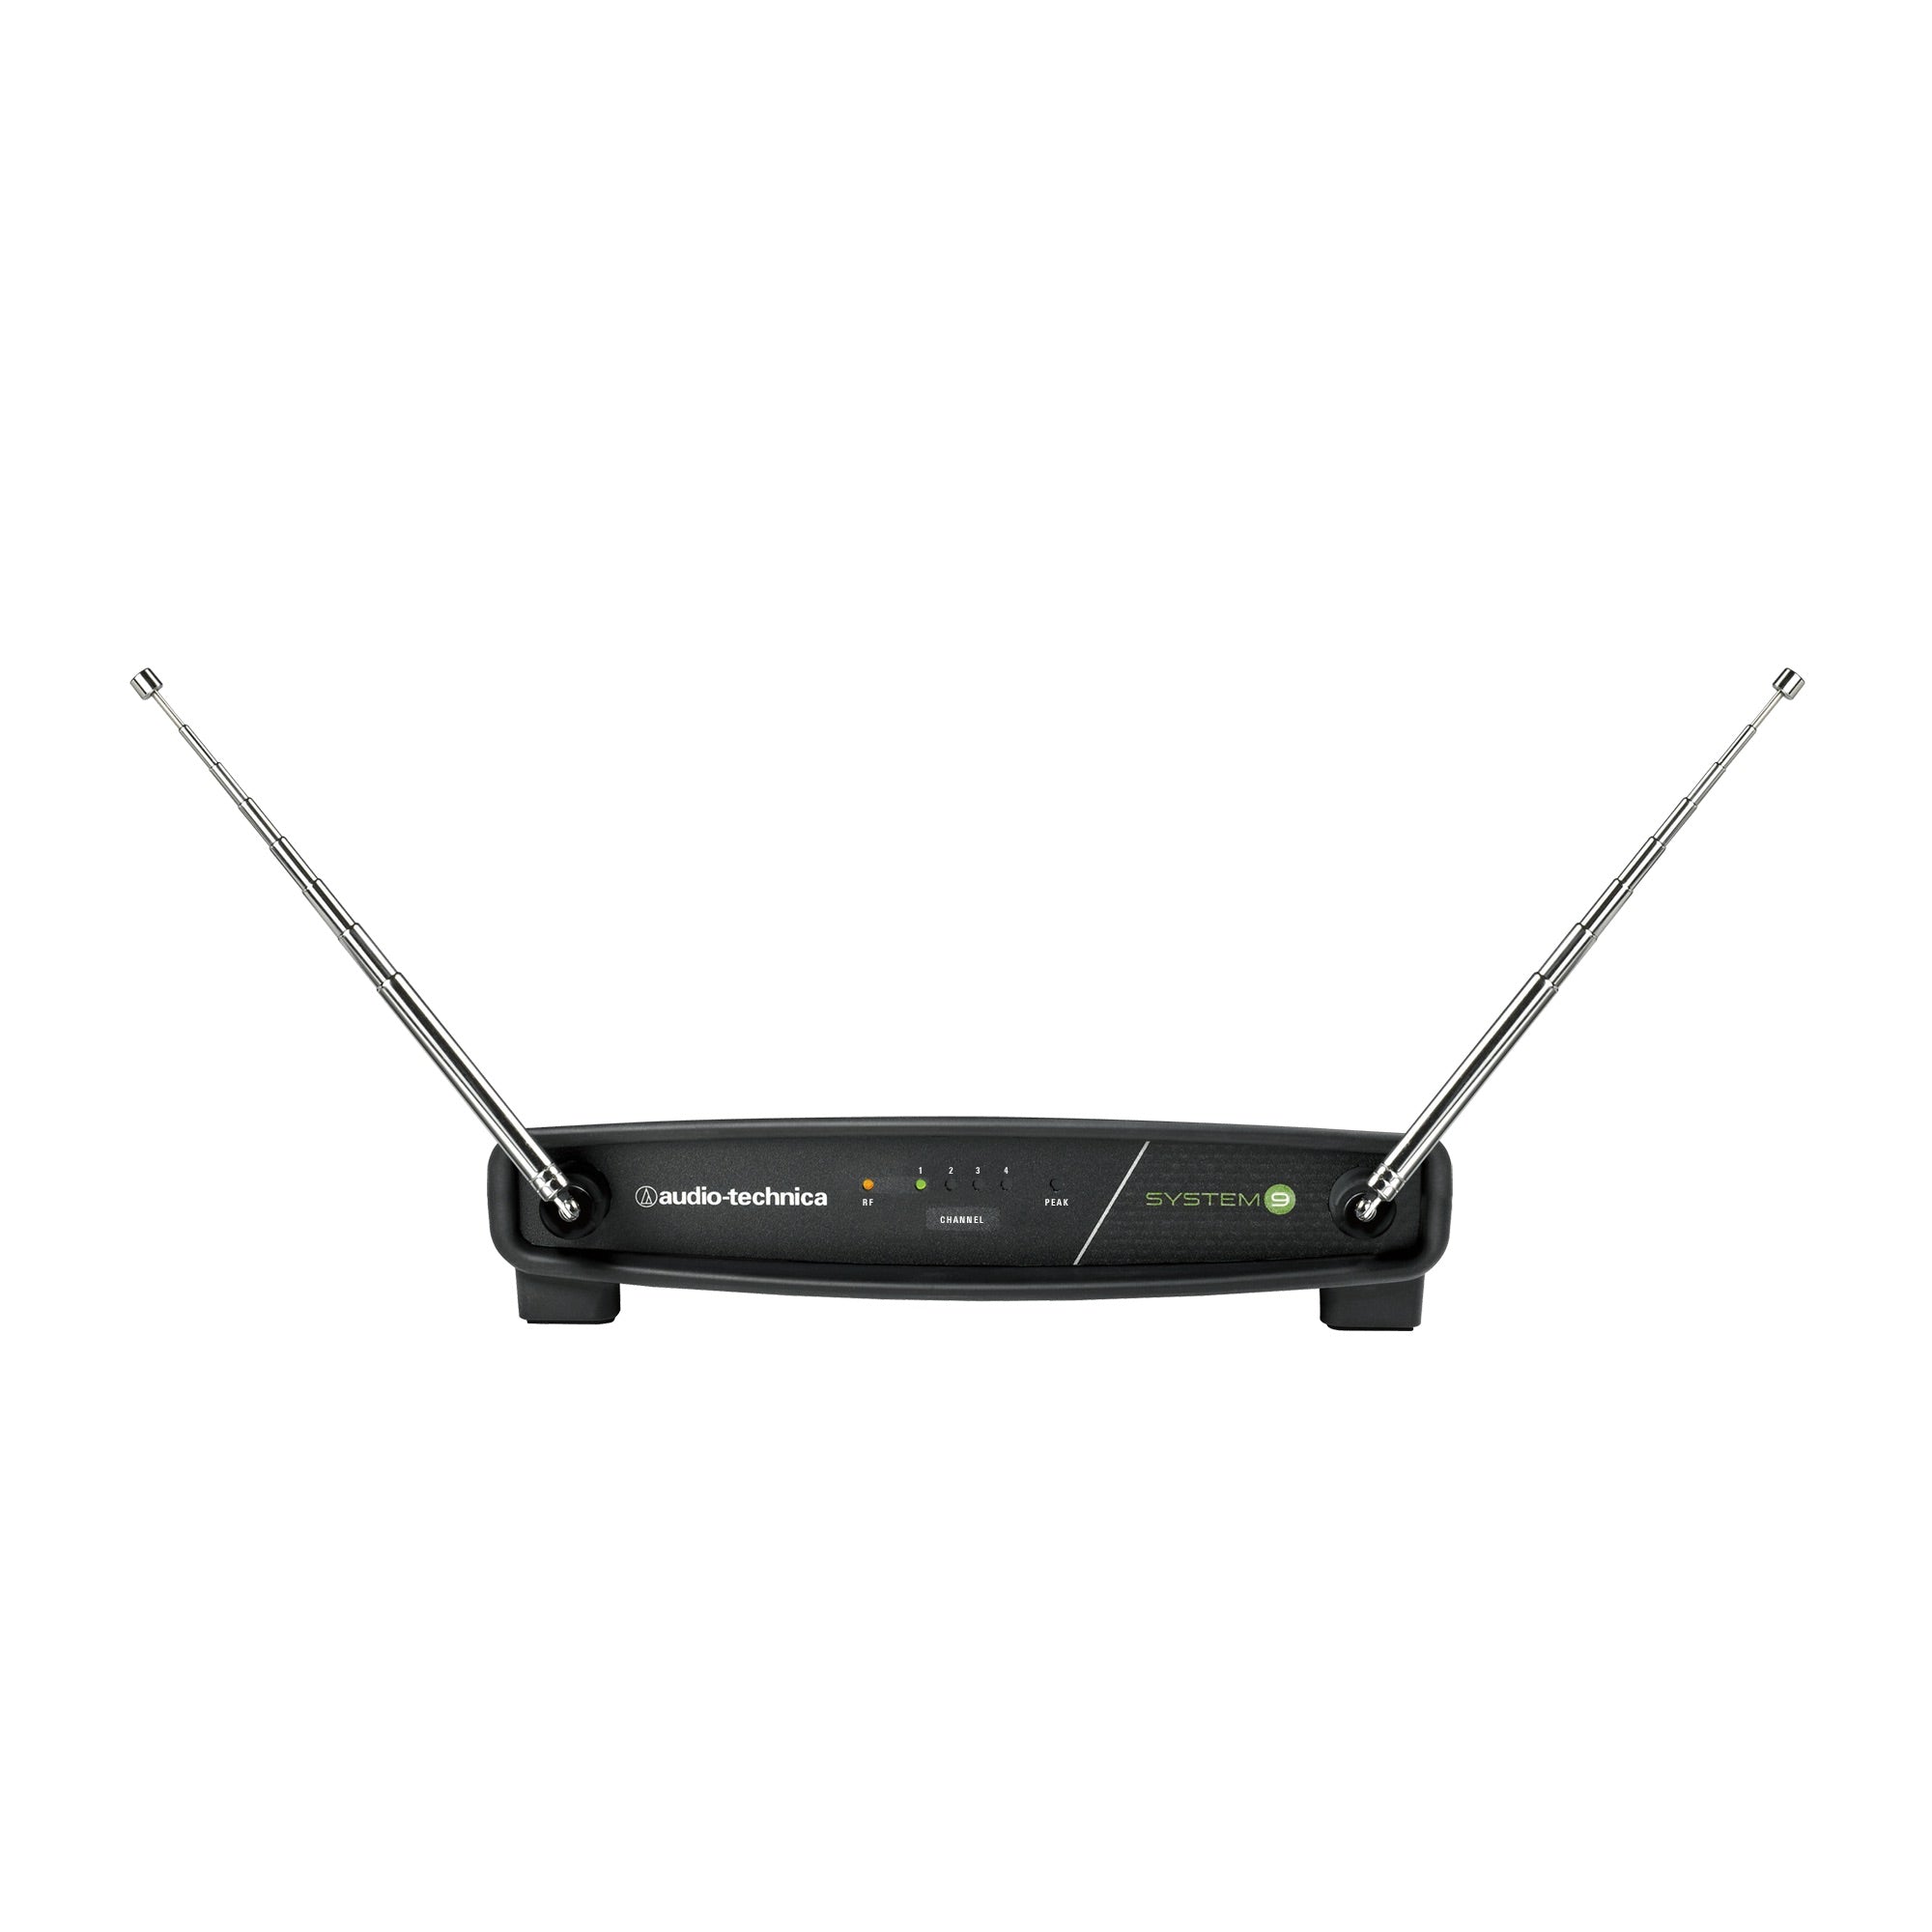 Audio-Technica ATW-R900a - System 9 VHF Wireless Receiver, front